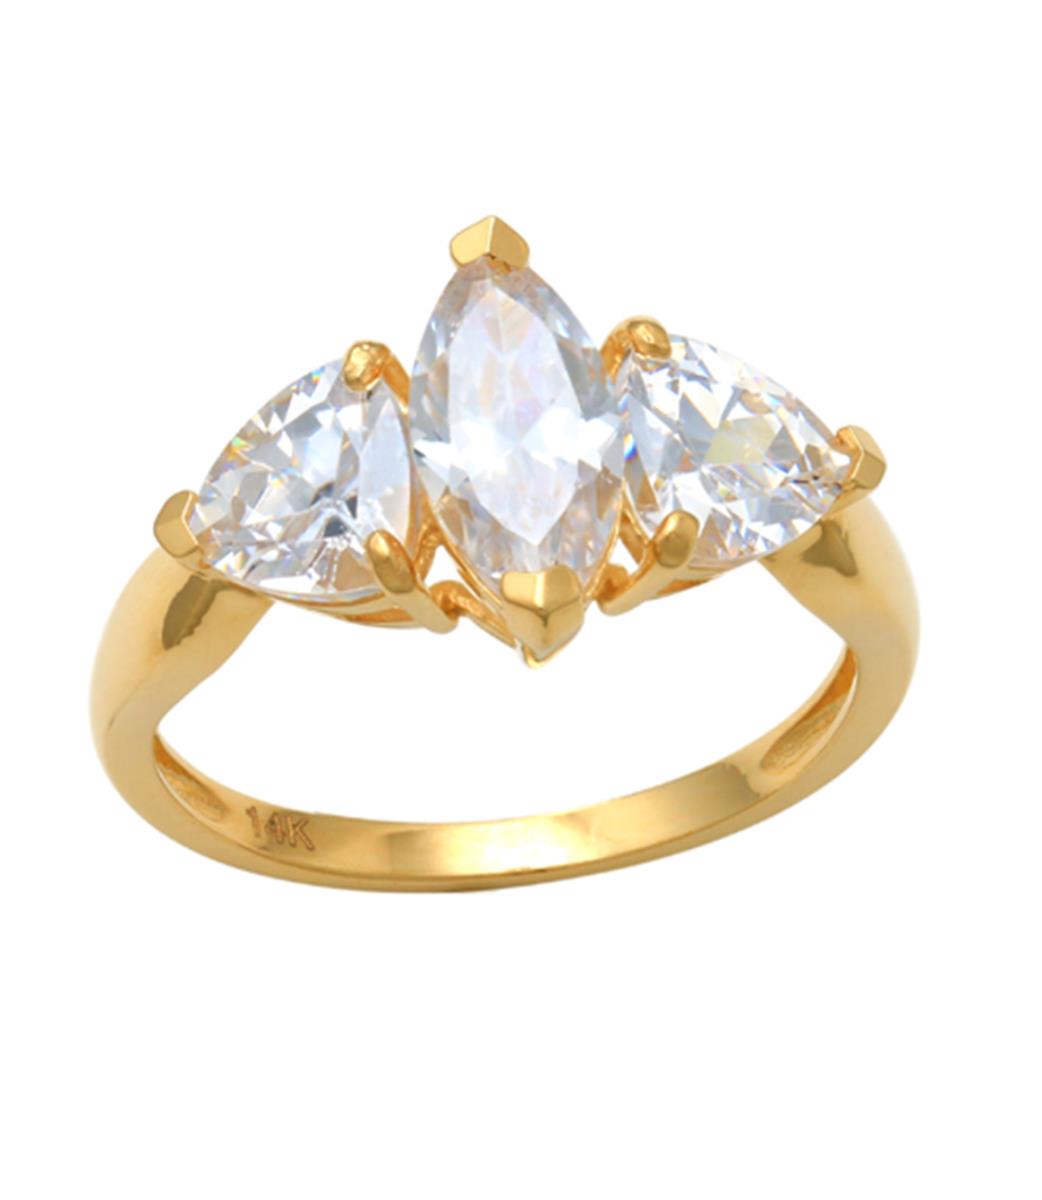 10K Yellow Gold Ma & Tl White CZ  Engagement Ring